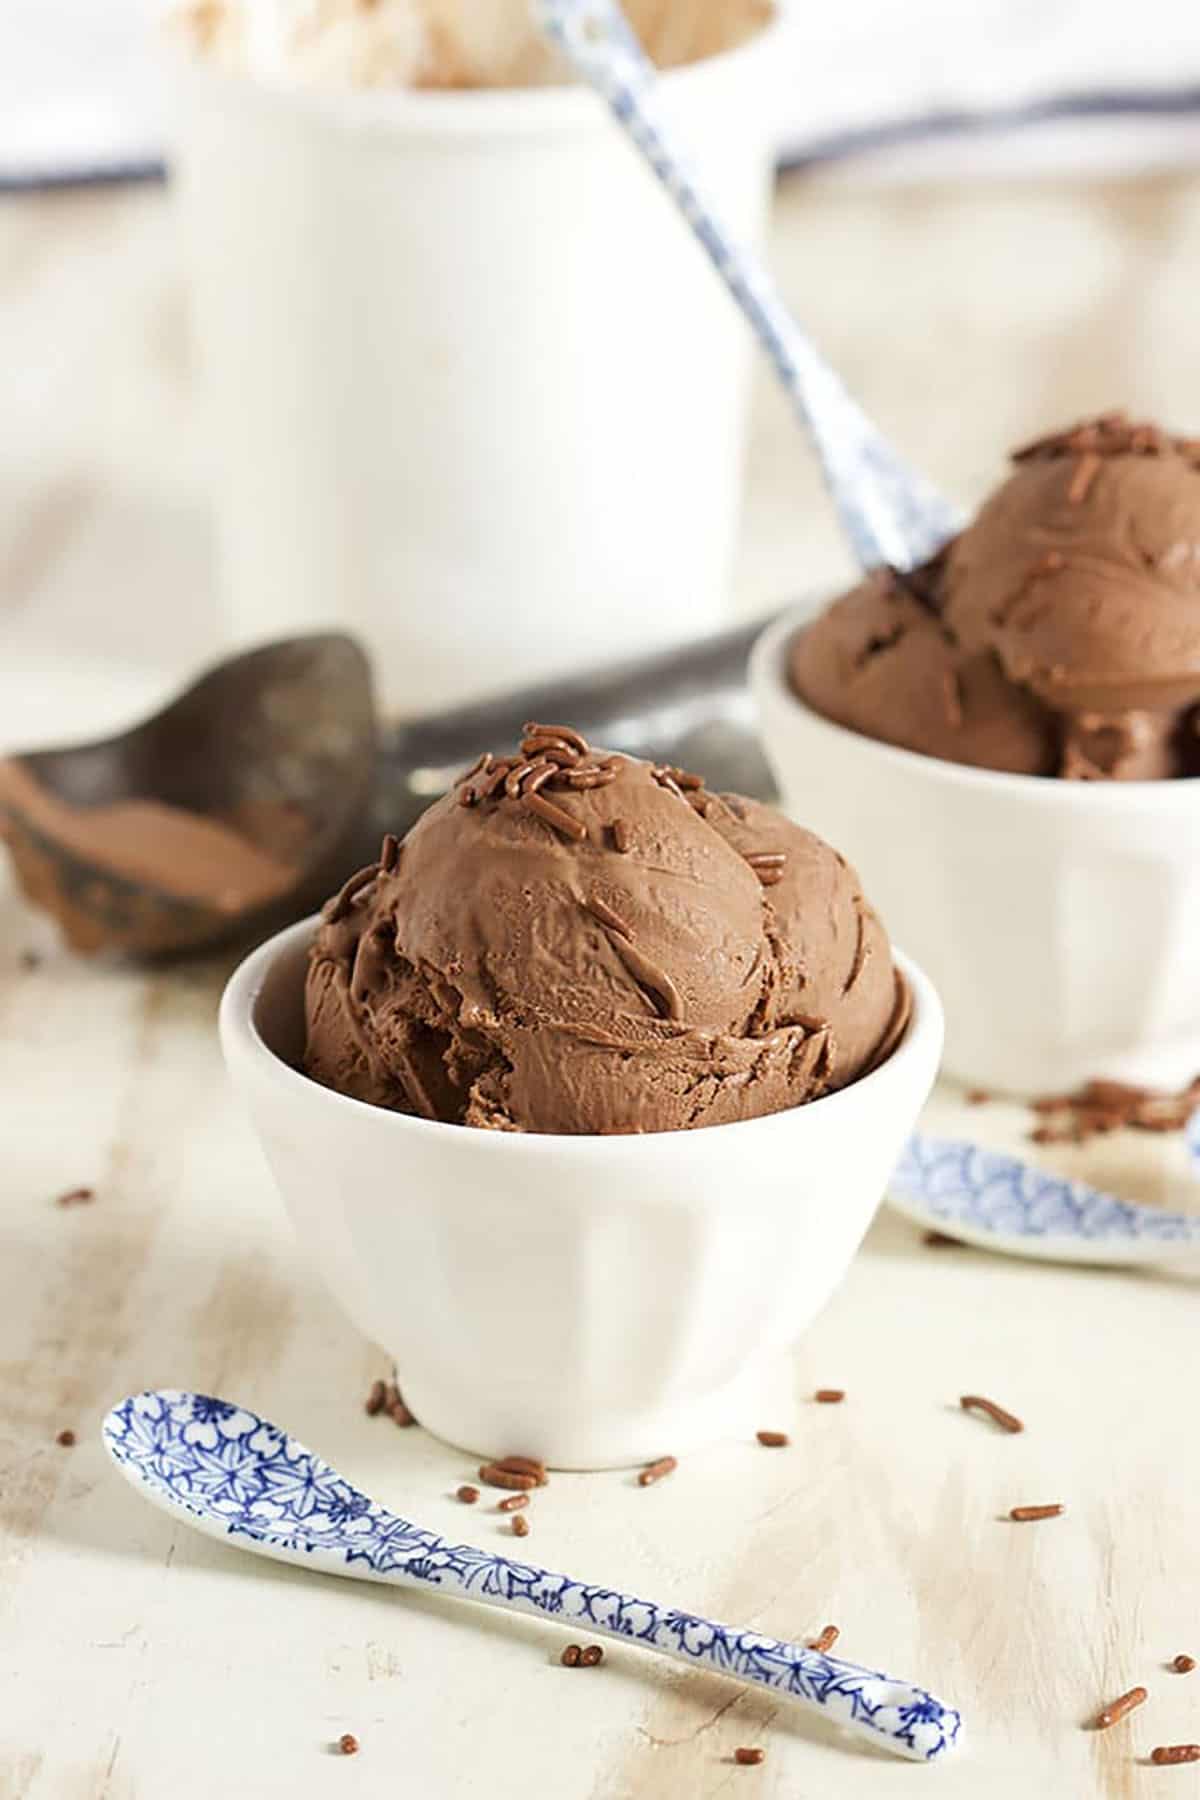 Chocolate ice cream in a white bowl on a white washed board with a blue and white spoon in front of it.